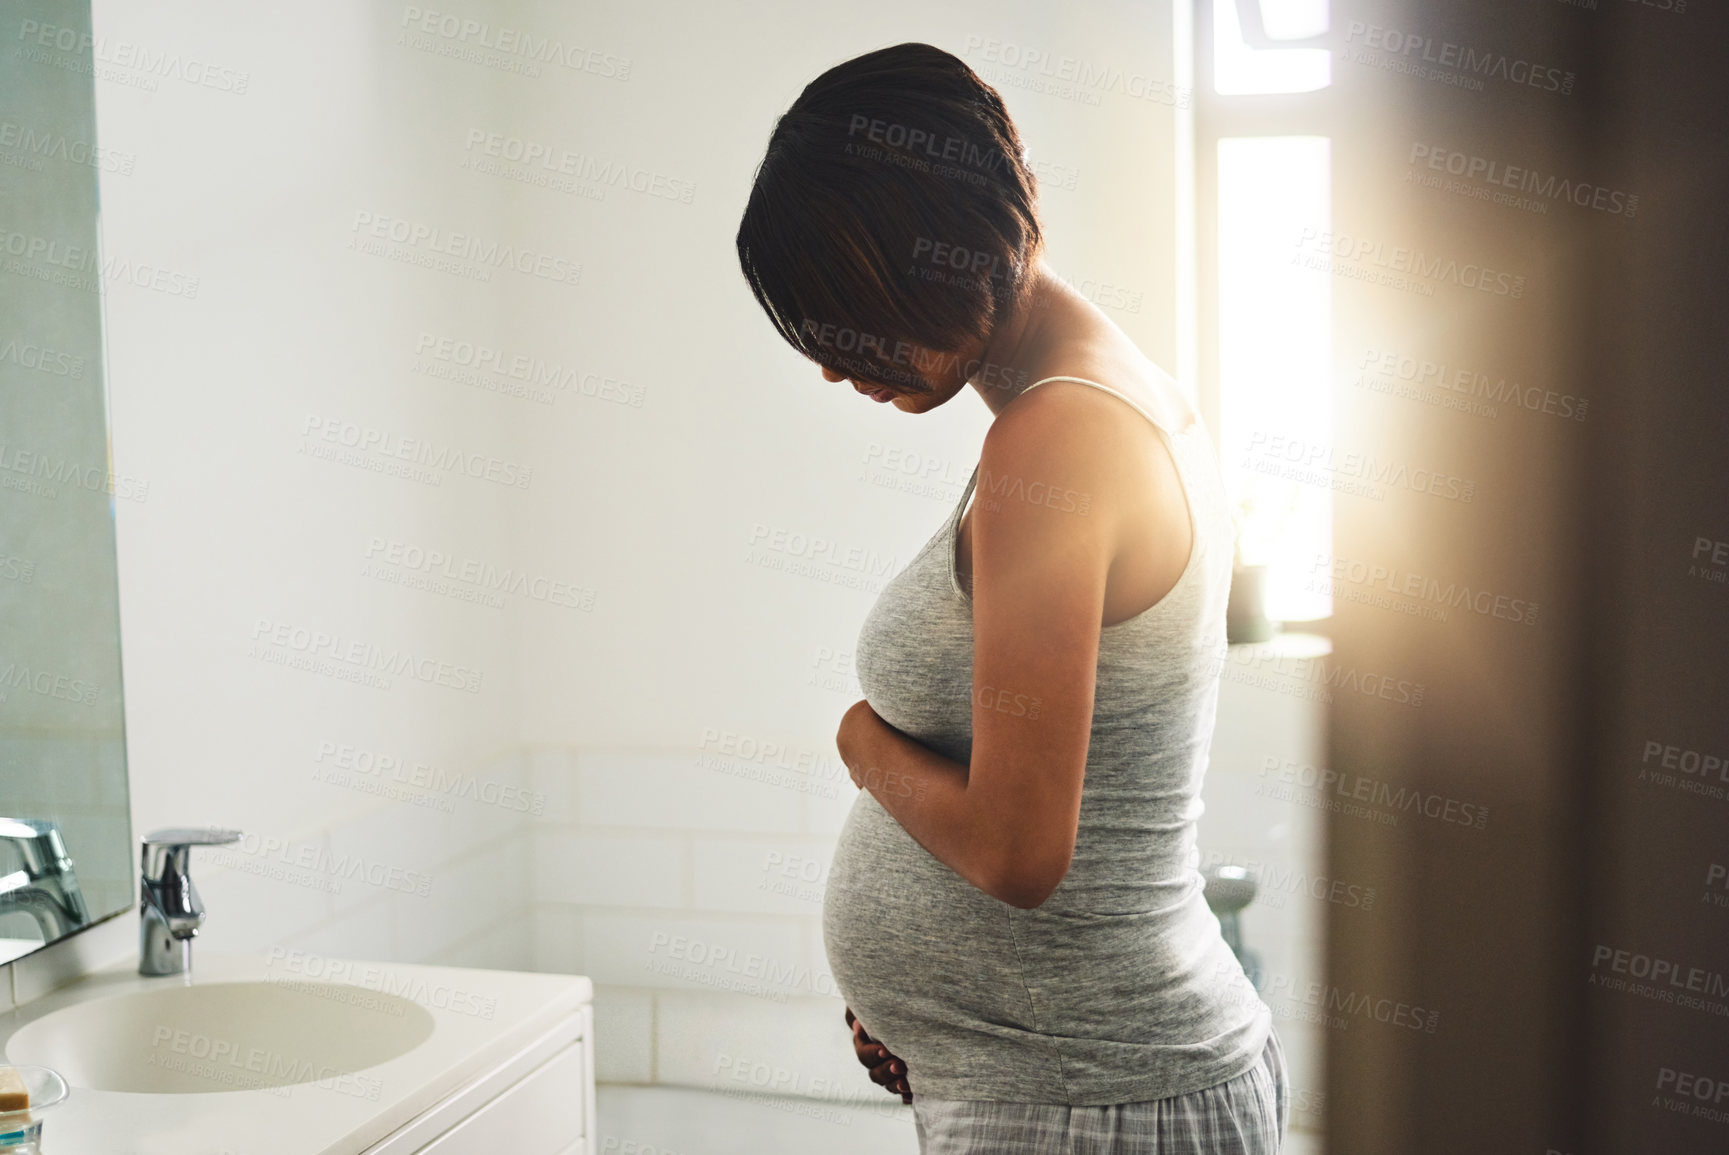 Buy stock photo Shot of a pregnant young woman standing in the bathroom at home